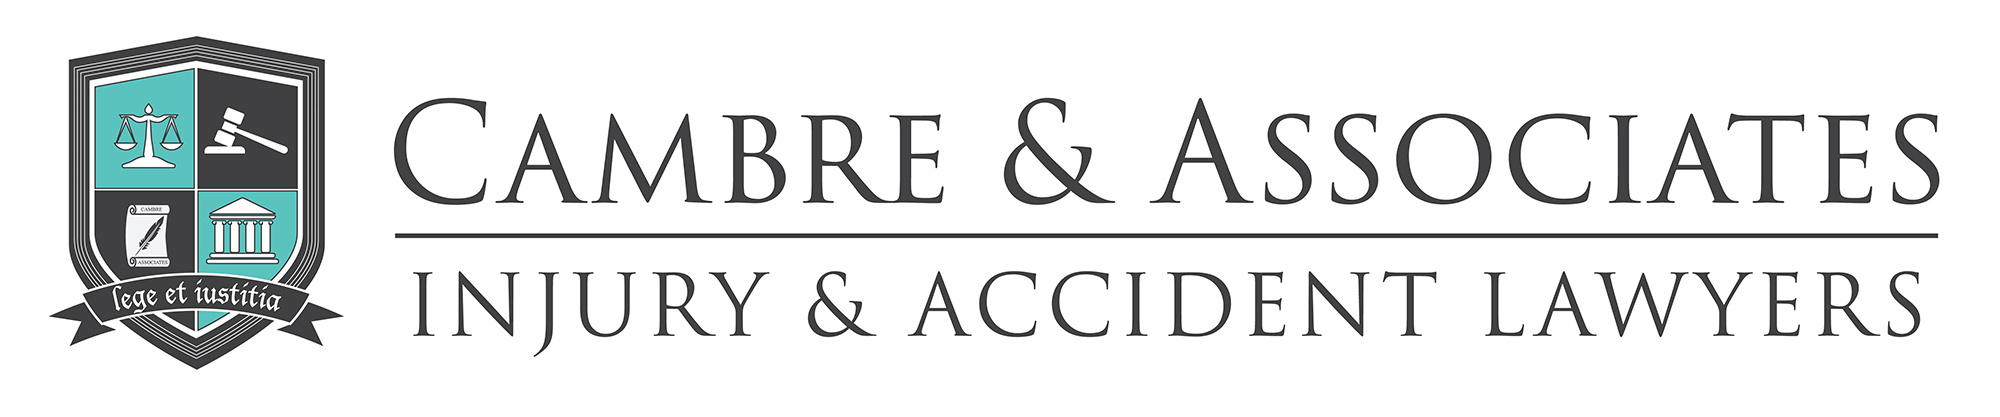 Top Atlanta, GA Legal Practice Specializes In Auto Accident Injury Lawsuits